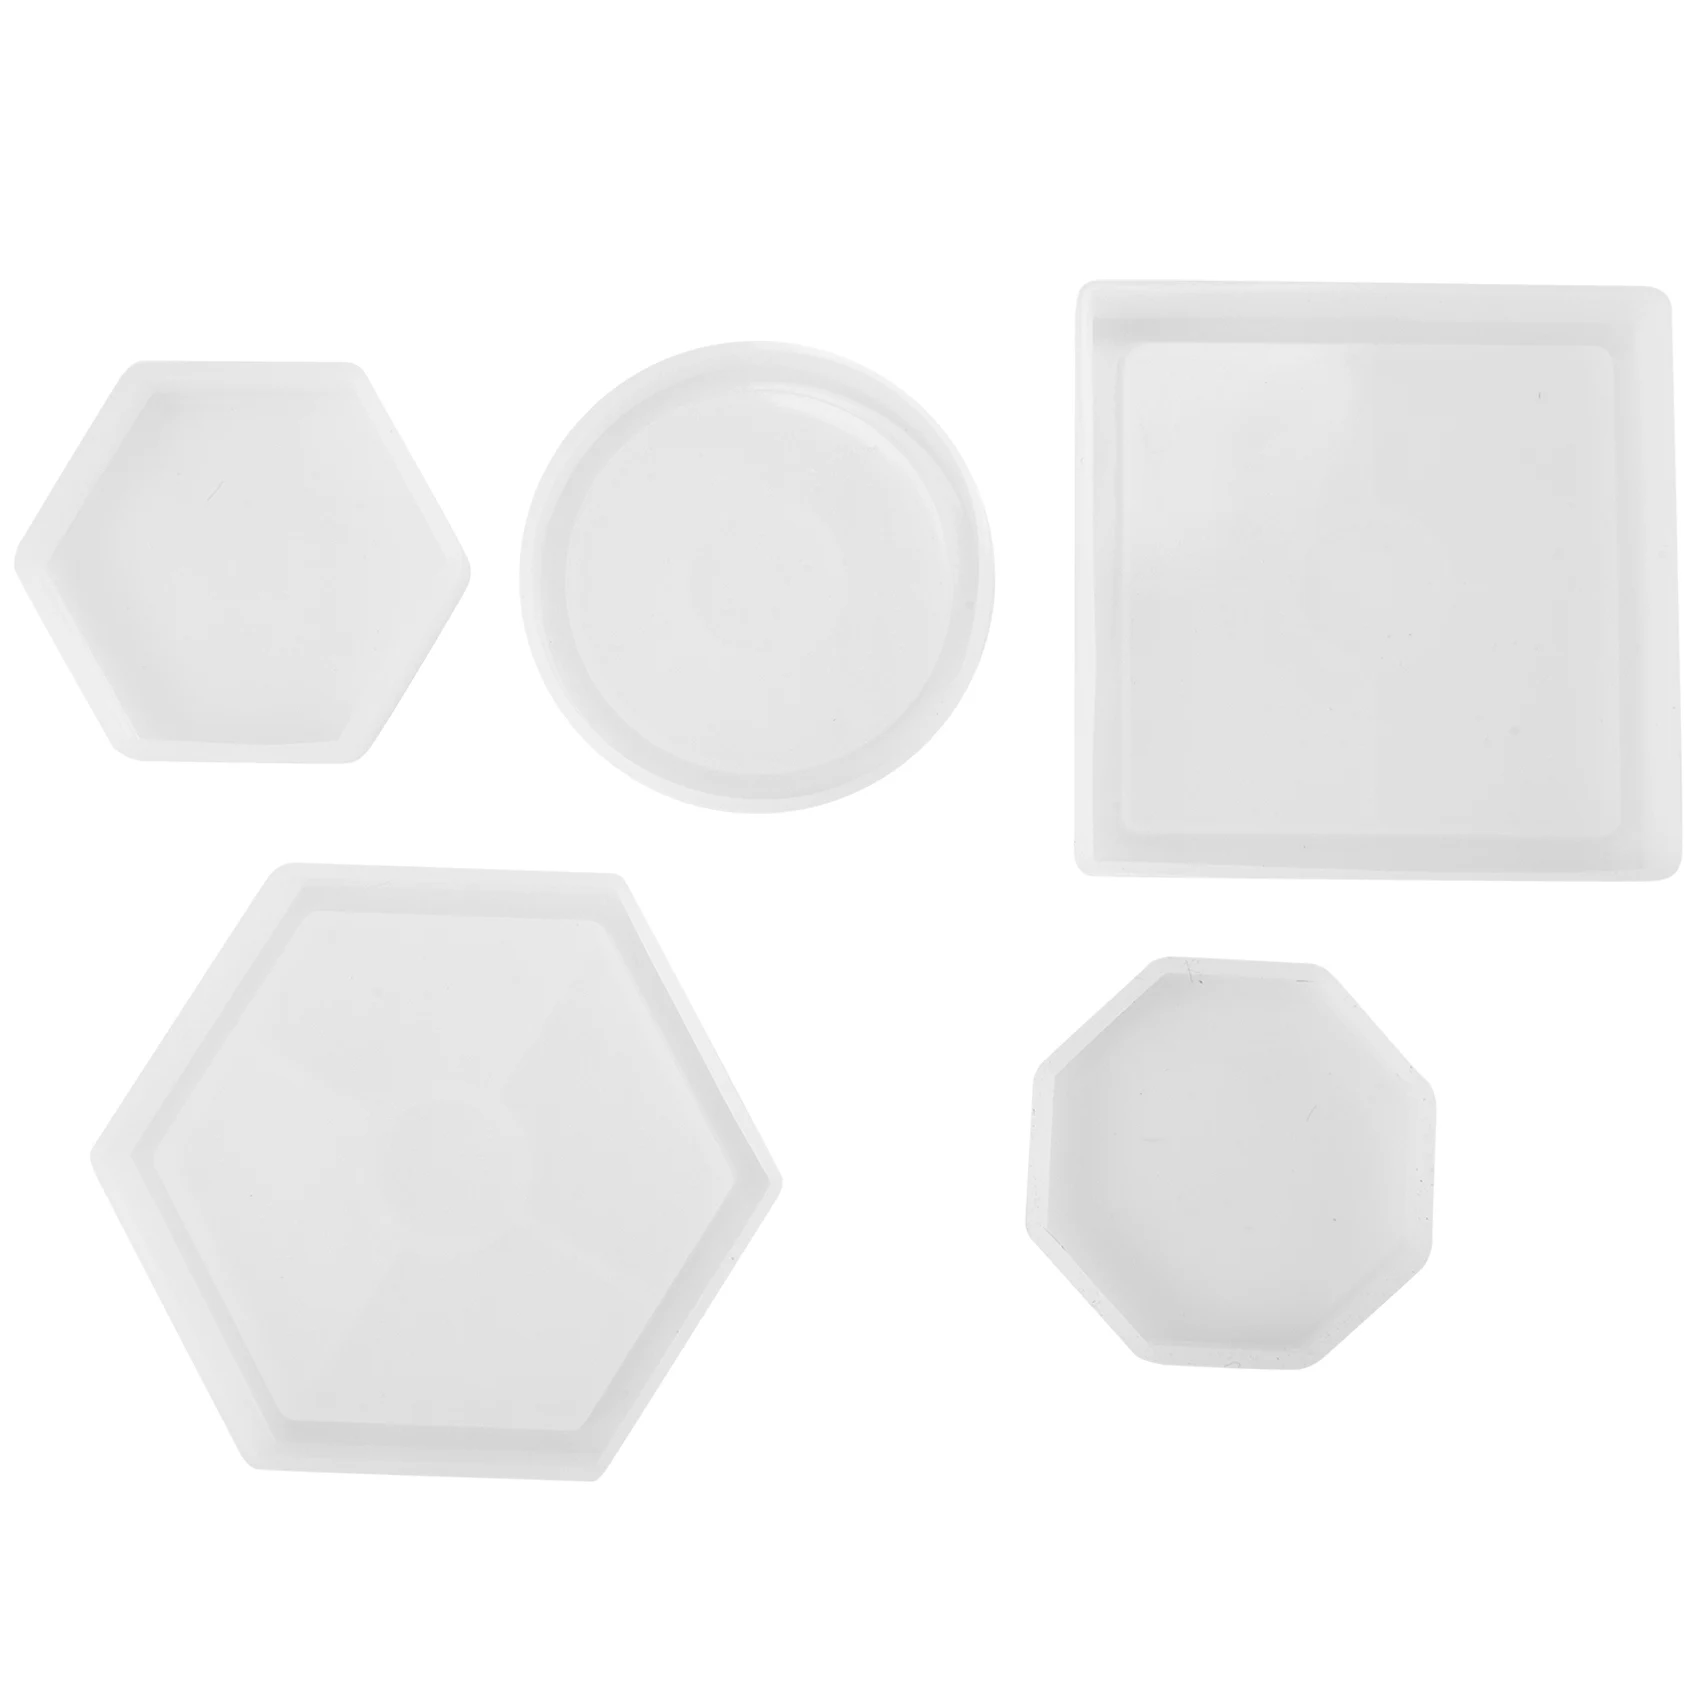 

5Pcs Diy Coaster Silicone Mold Included Square Hexagon Circle Octagon Mold For Resin, Concrete, Cement, Home Decoration